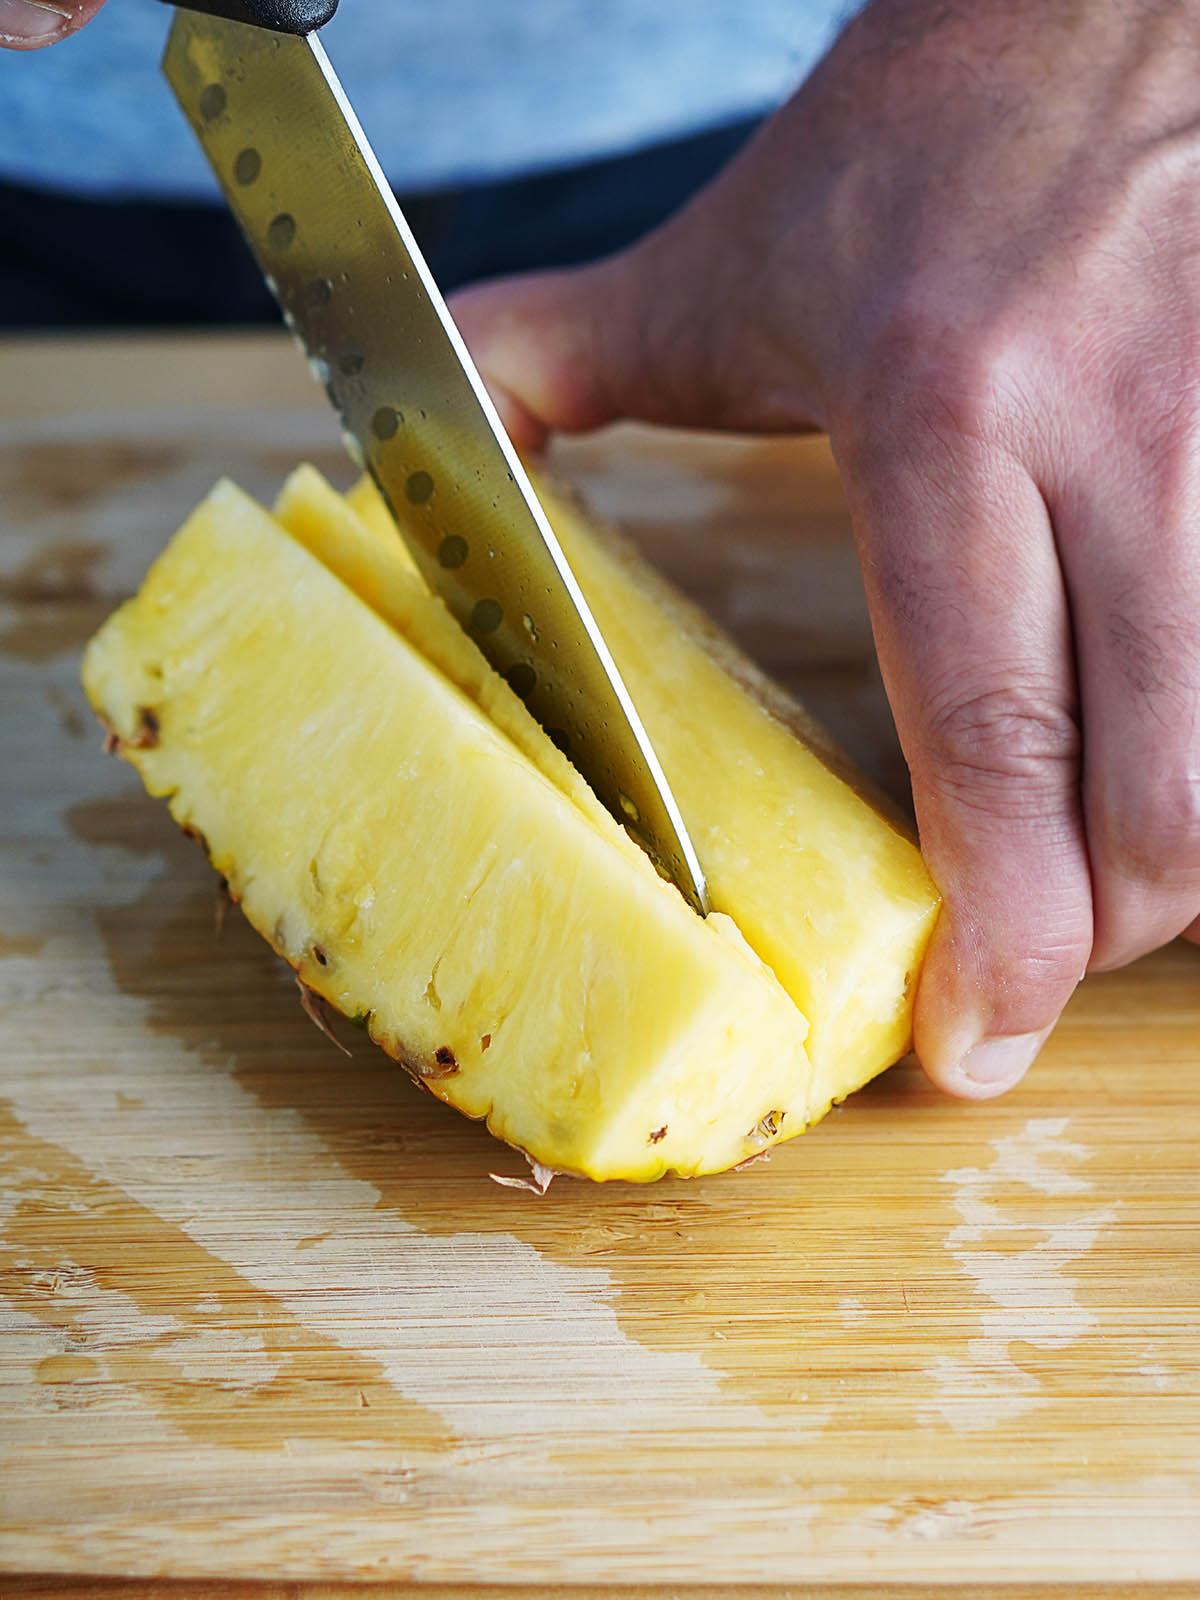 A hand removing the core of a pineapple with a knife.